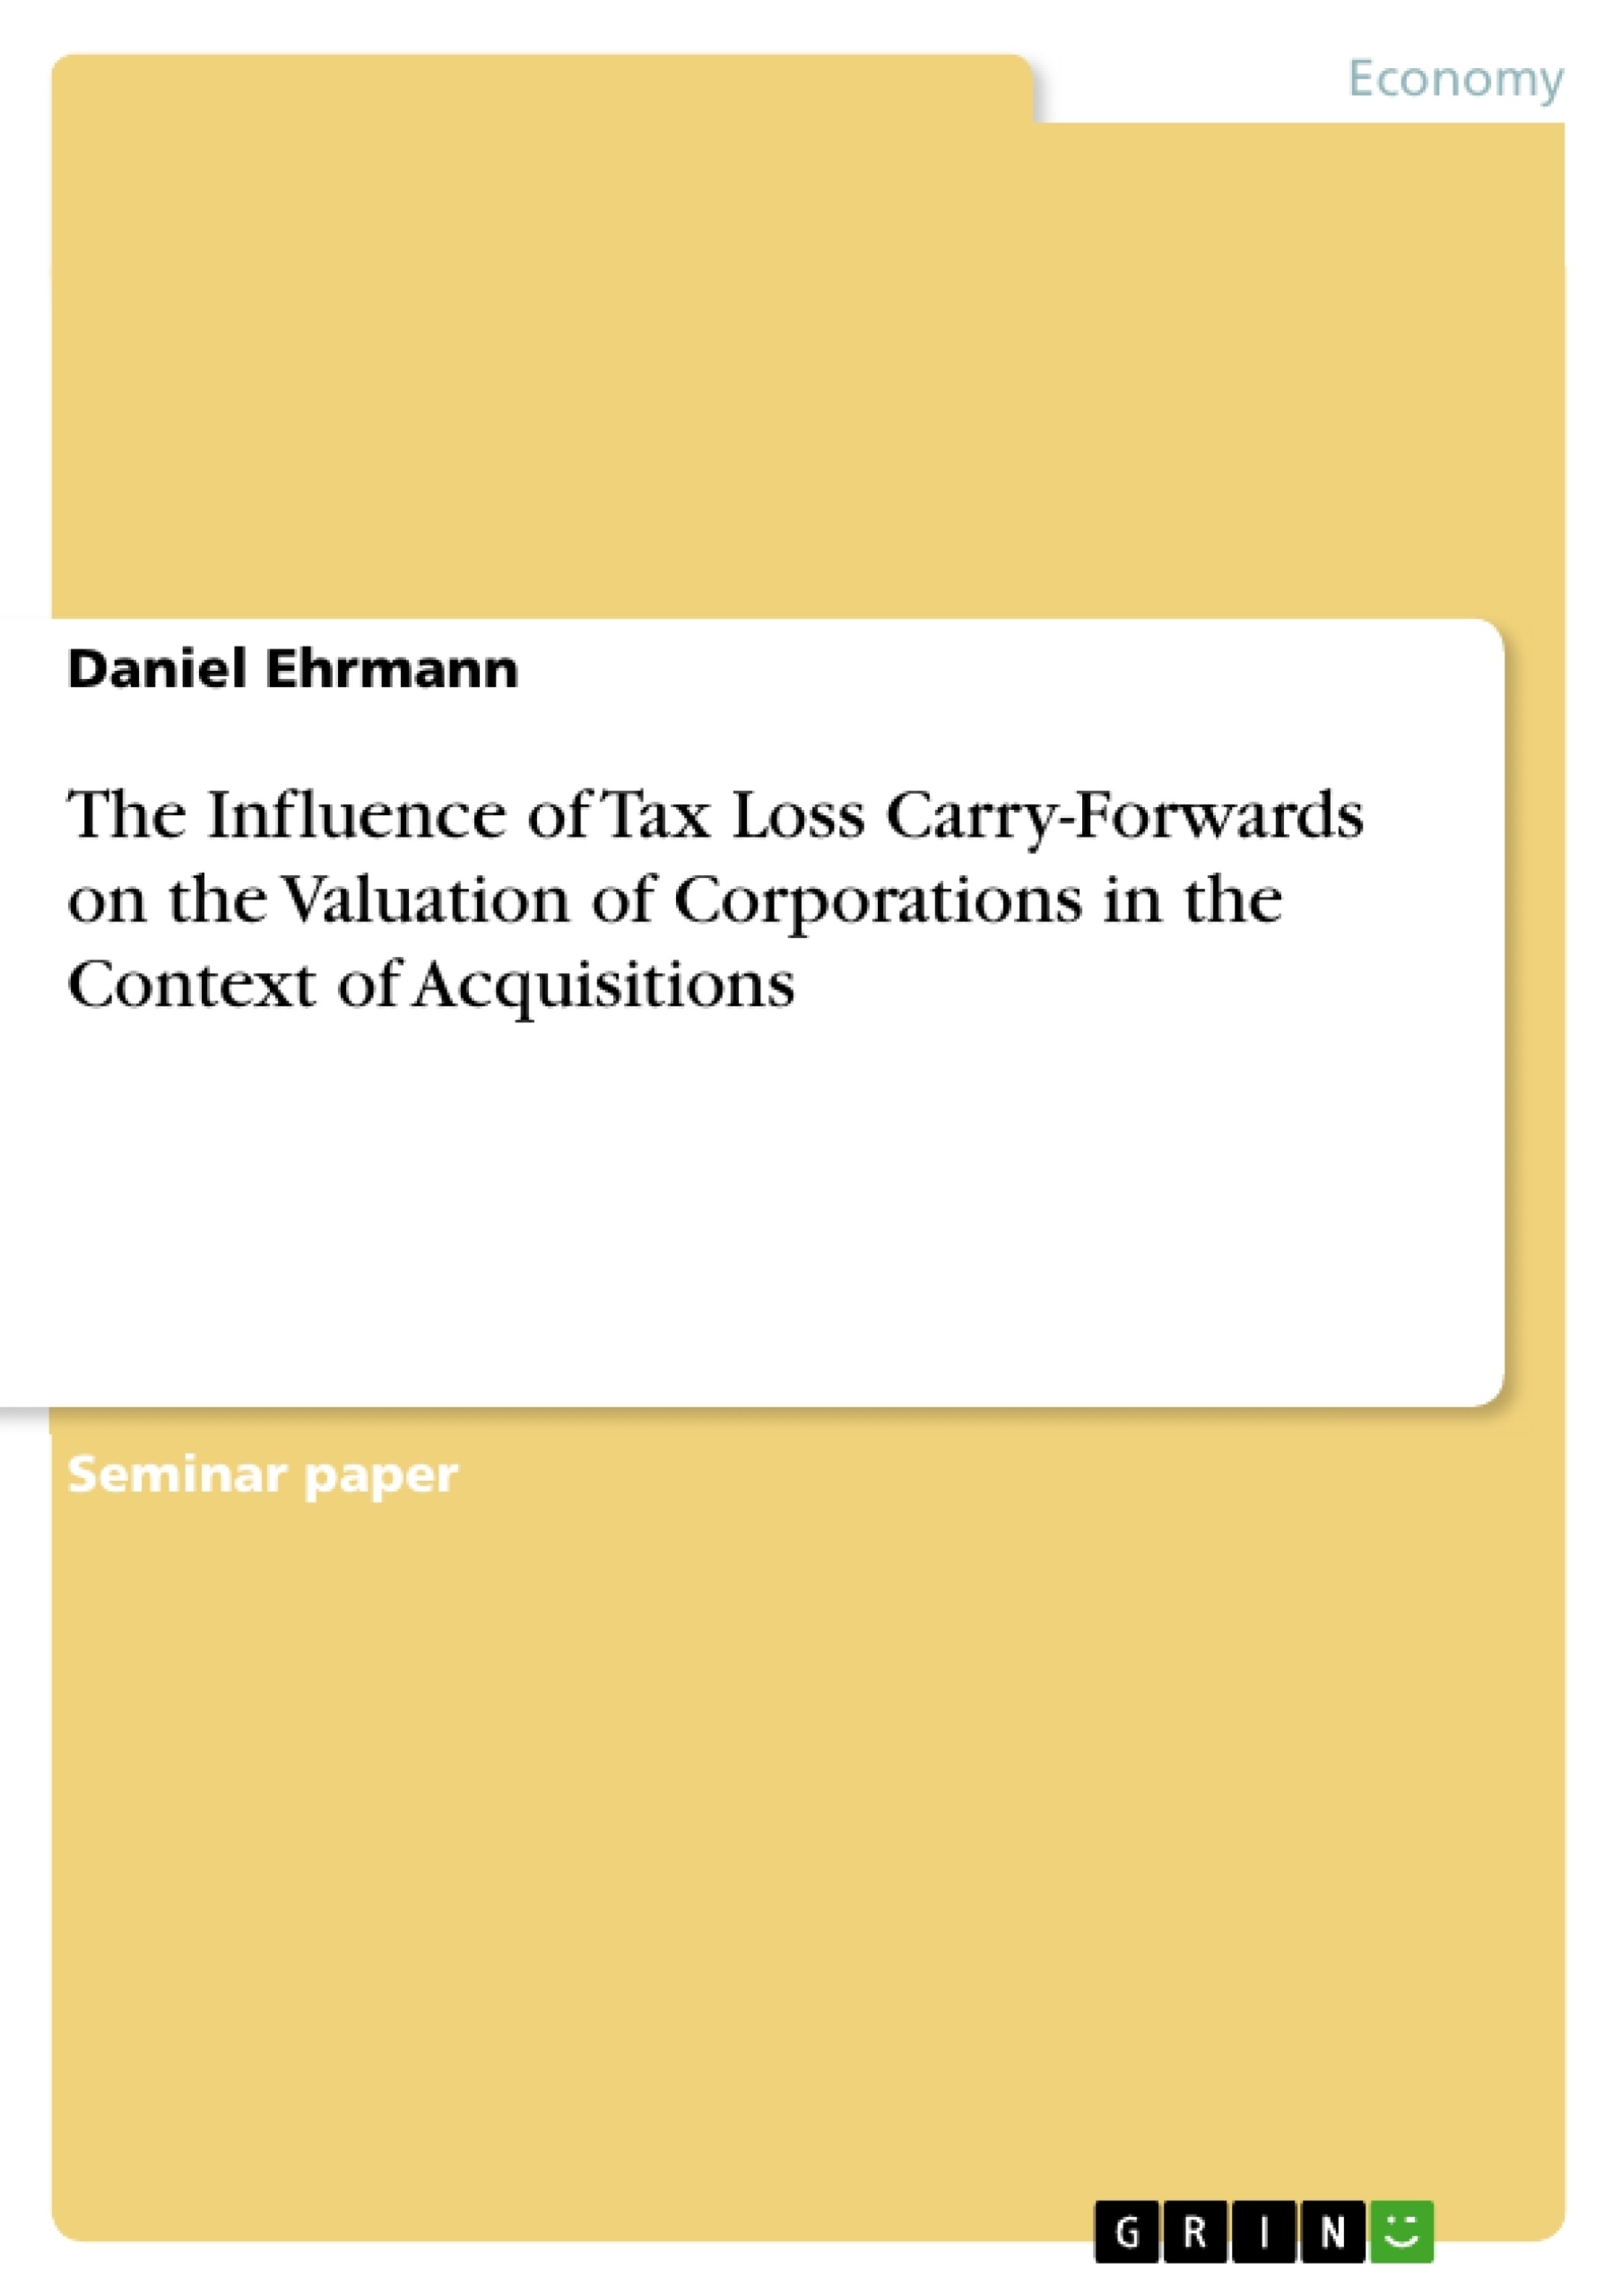 Titel: The Influence of Tax Loss Carry-Forwards on the Valuation of Corporations in the Context of Acquisitions